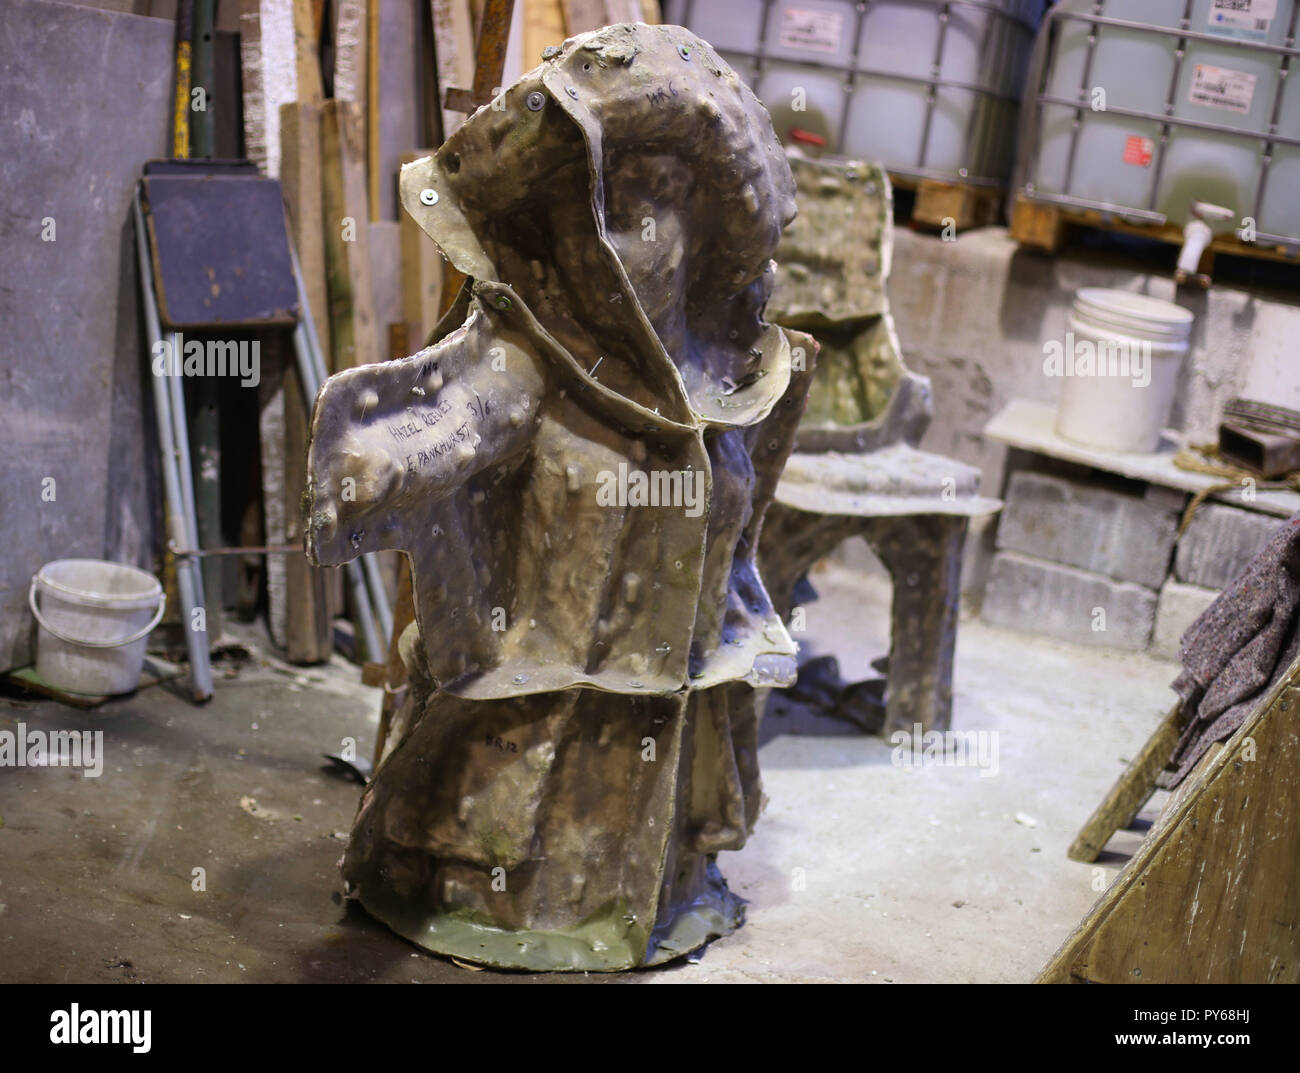 A ceramic shell of the upper half of Our Emmeline, a bronze statue of Emmeline Pankhurst by sculptor Hazel Reeves, at Bronze Age Sculpture Casting Foundry in east London. Stock Photo